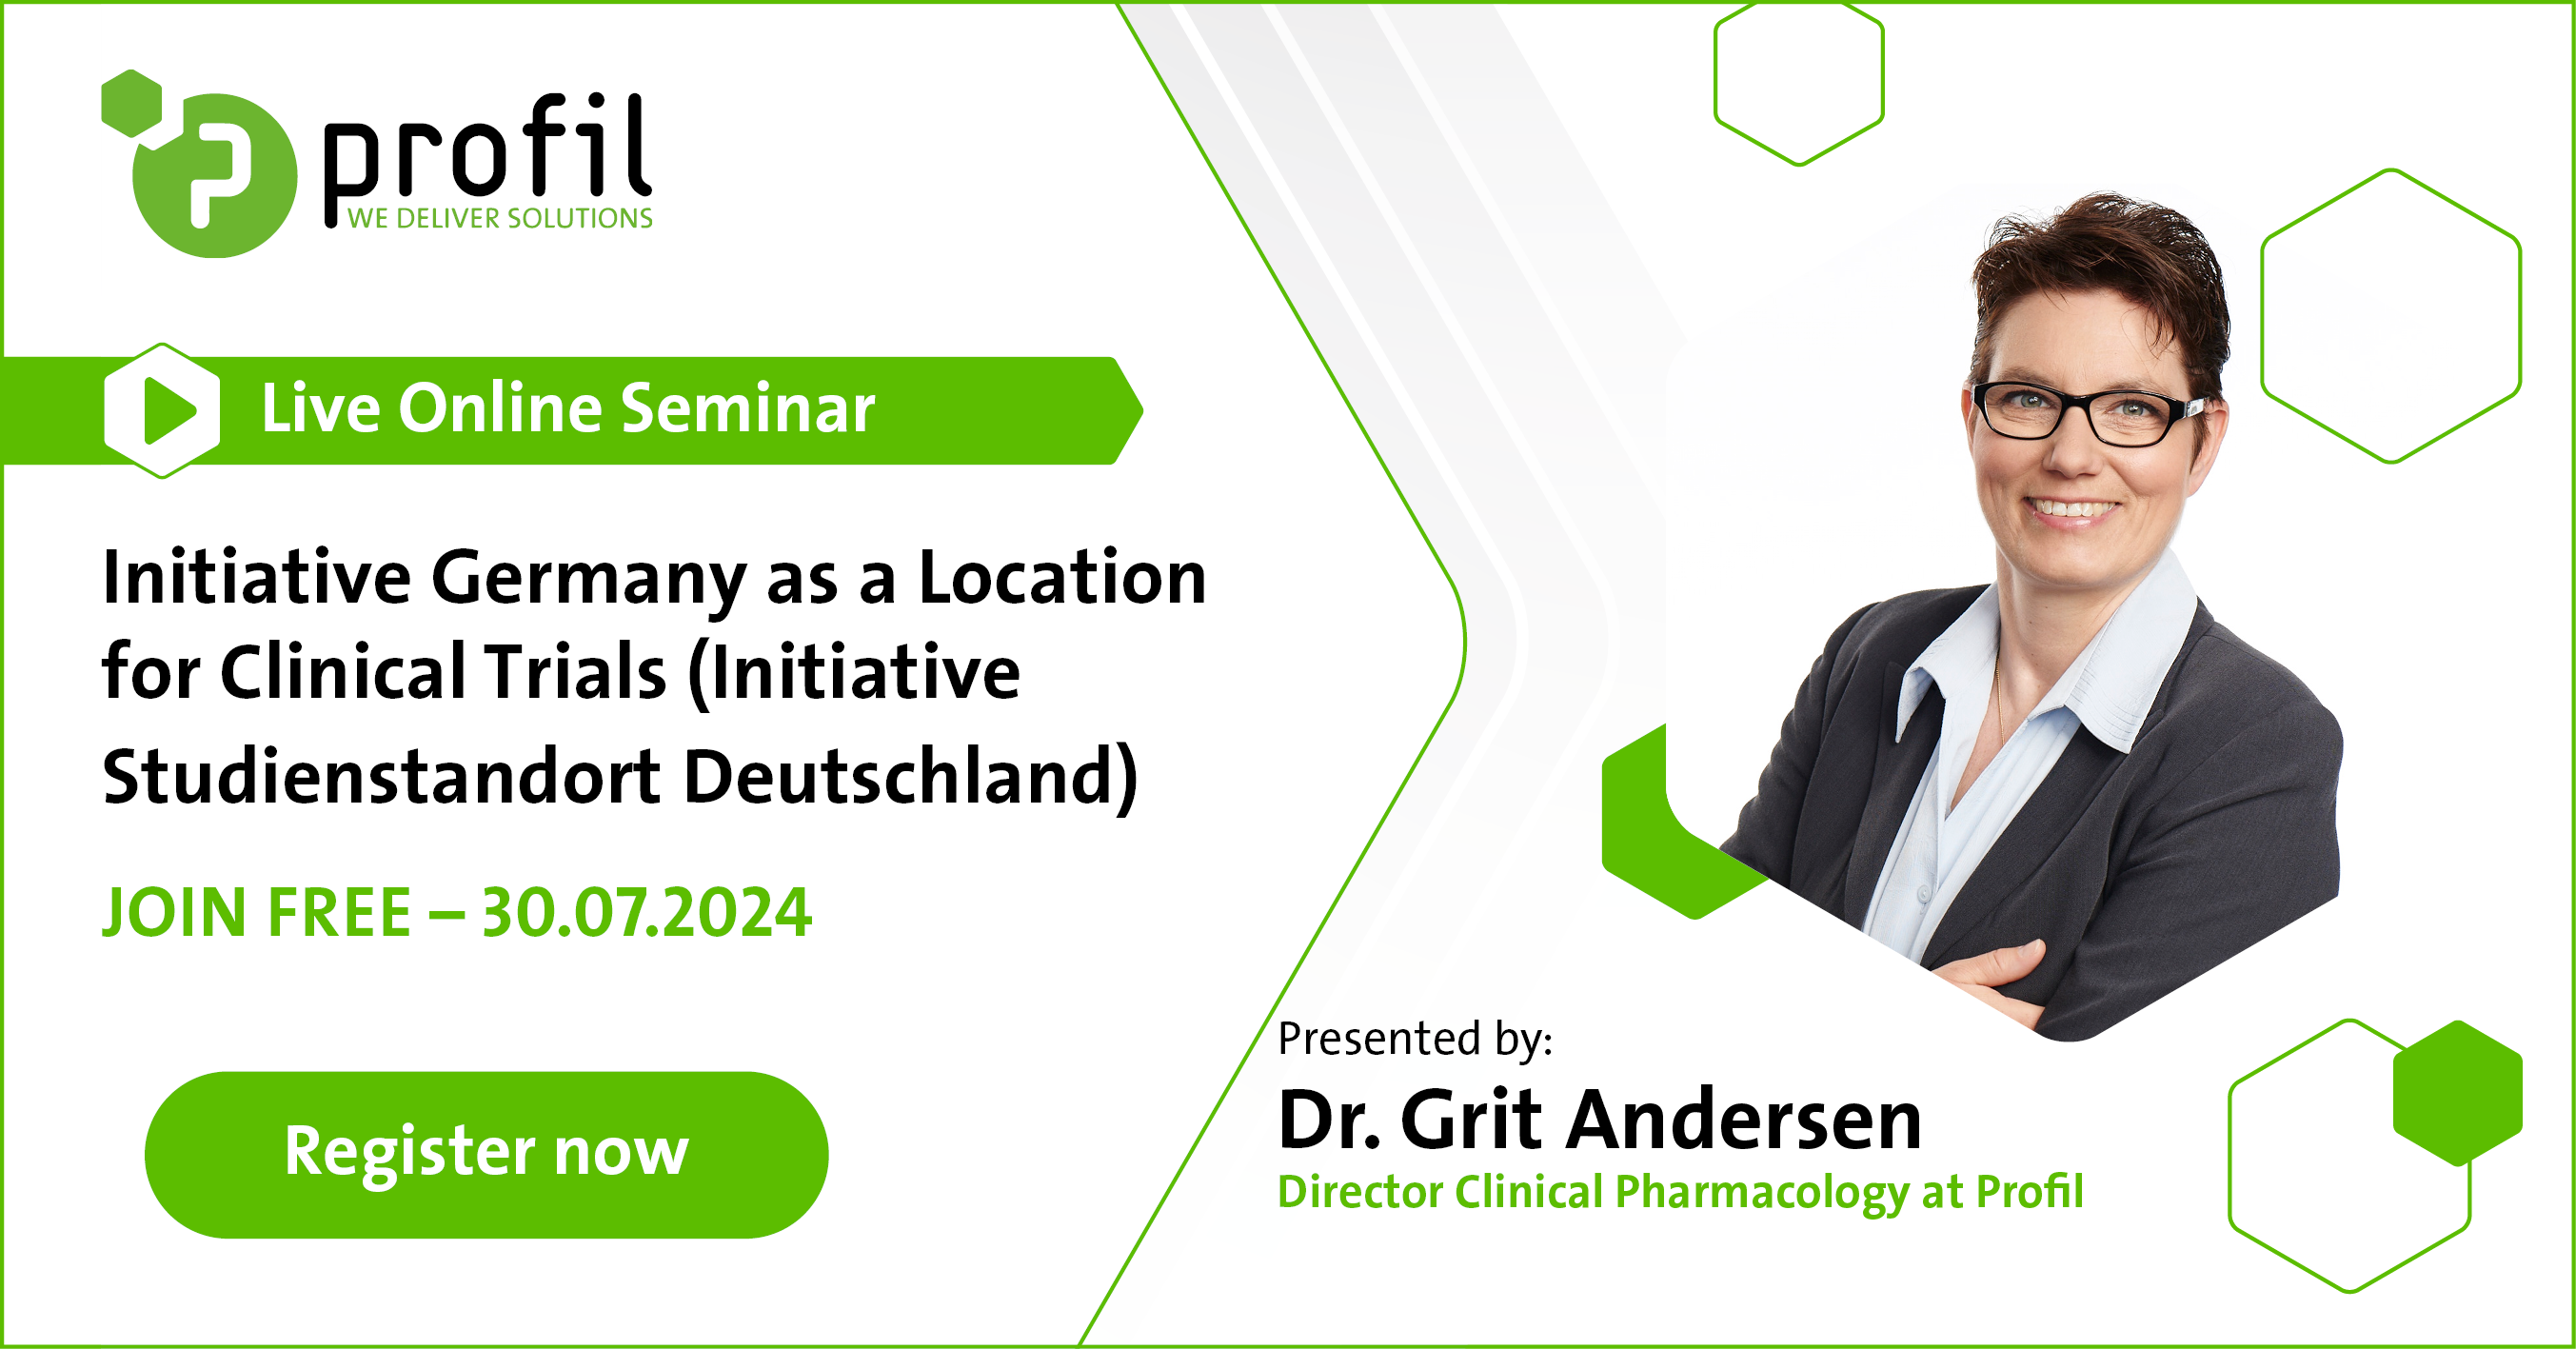 Live Online Seminar: Initiative Germany as a Location for Clinical Trials